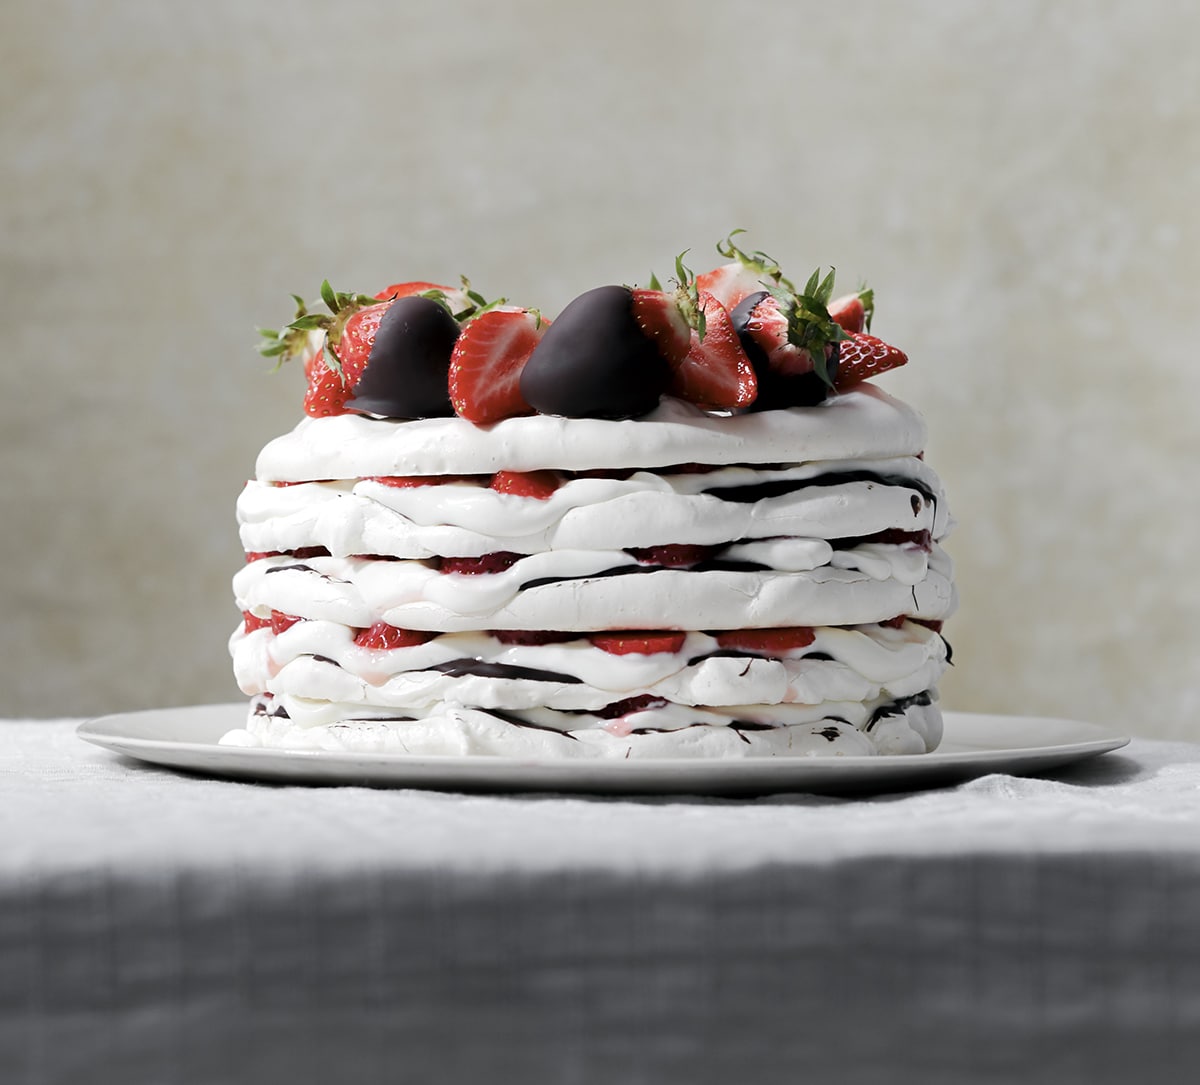 A strawberry cake made with Borough Market ingredients